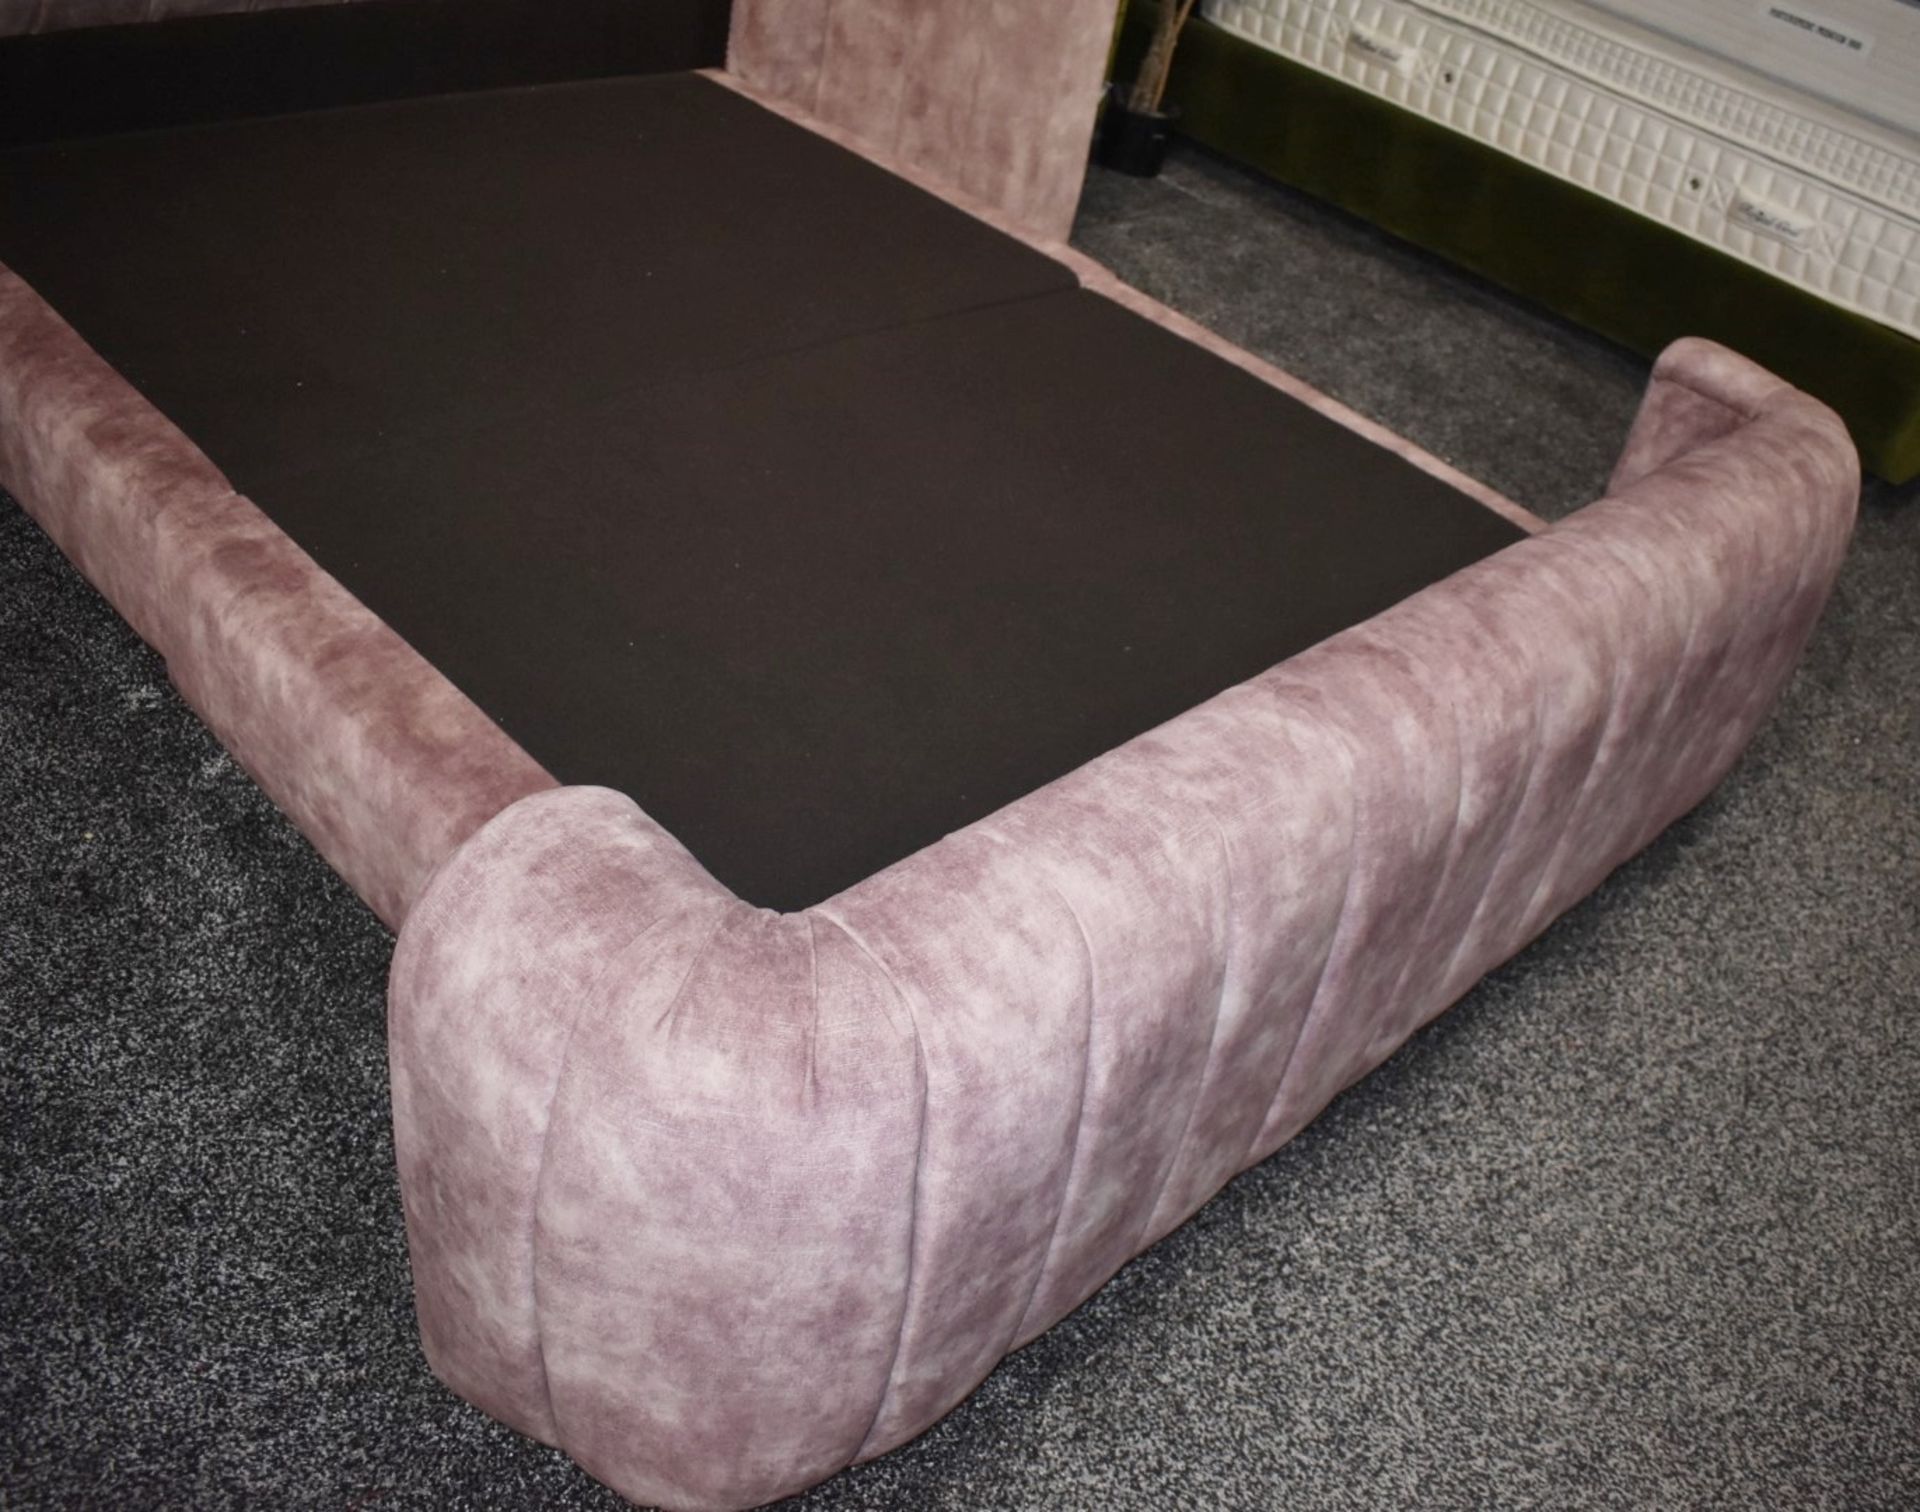 1 x Kingsize Bedframe, Richly Upholstered in a Premium Pink Chenille - Luxury Furniture Showroom - Image 4 of 5